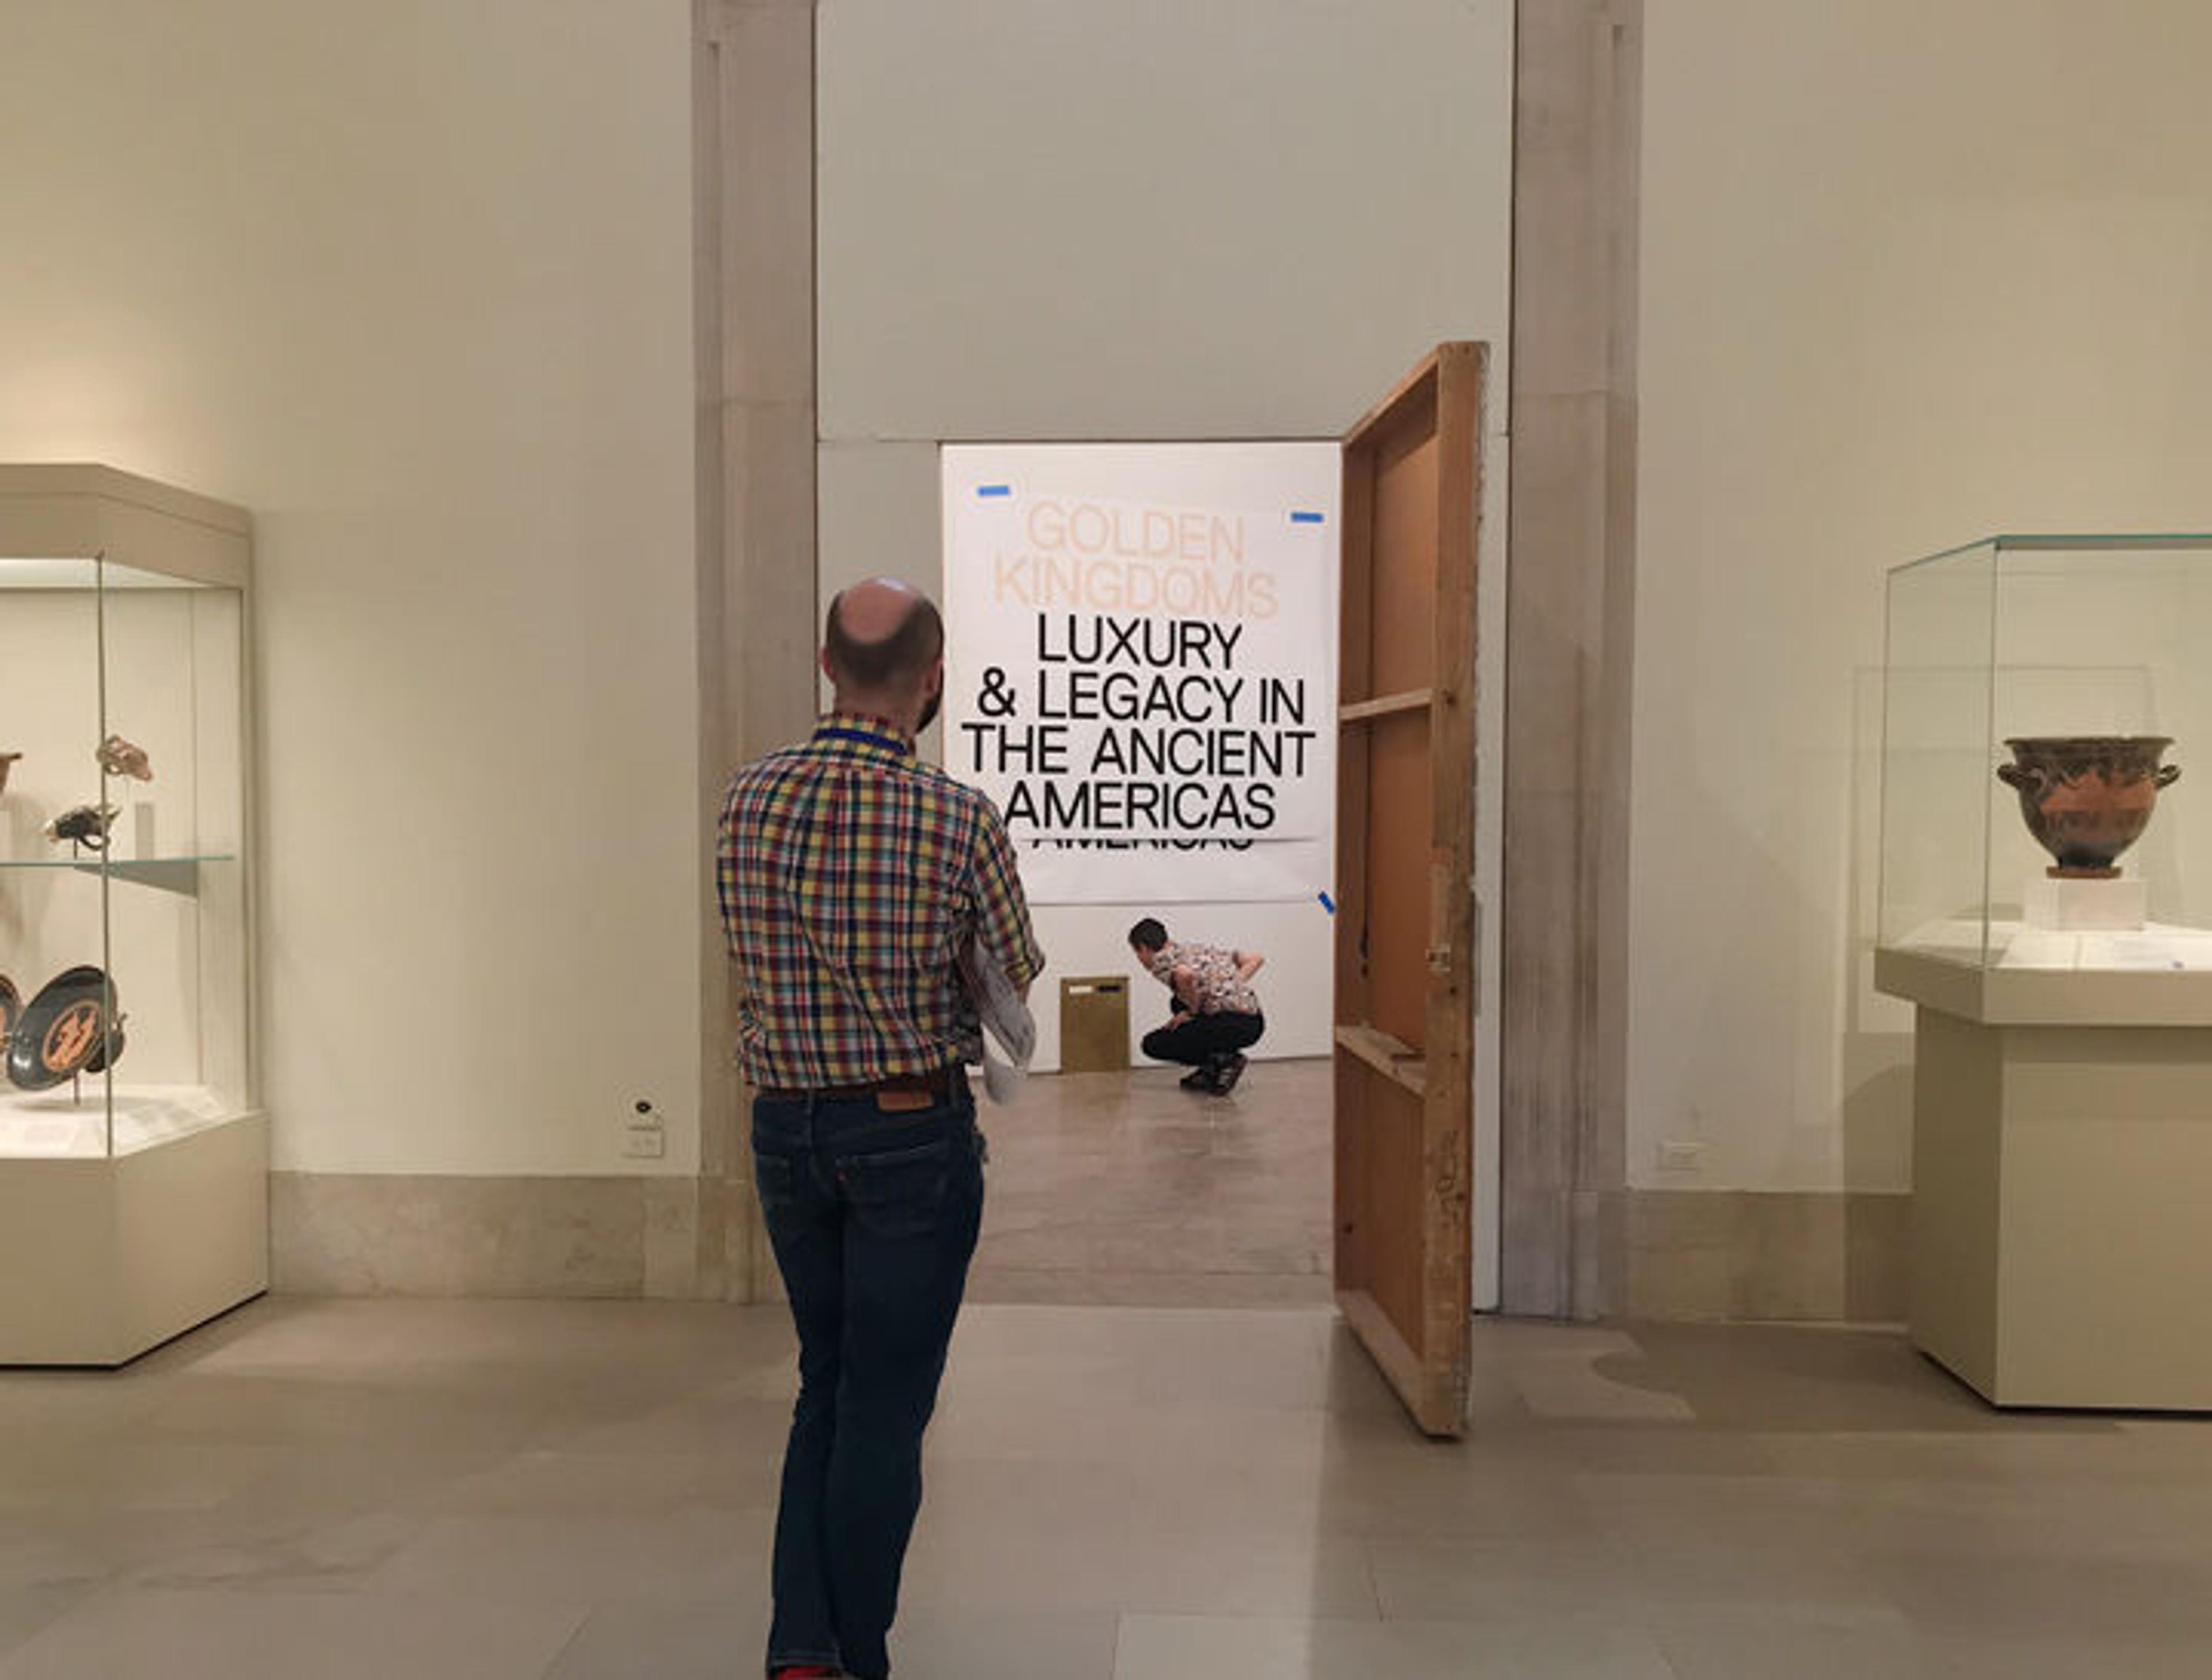 Two Met staff members see how an exhibition's title looks on a gallery wall